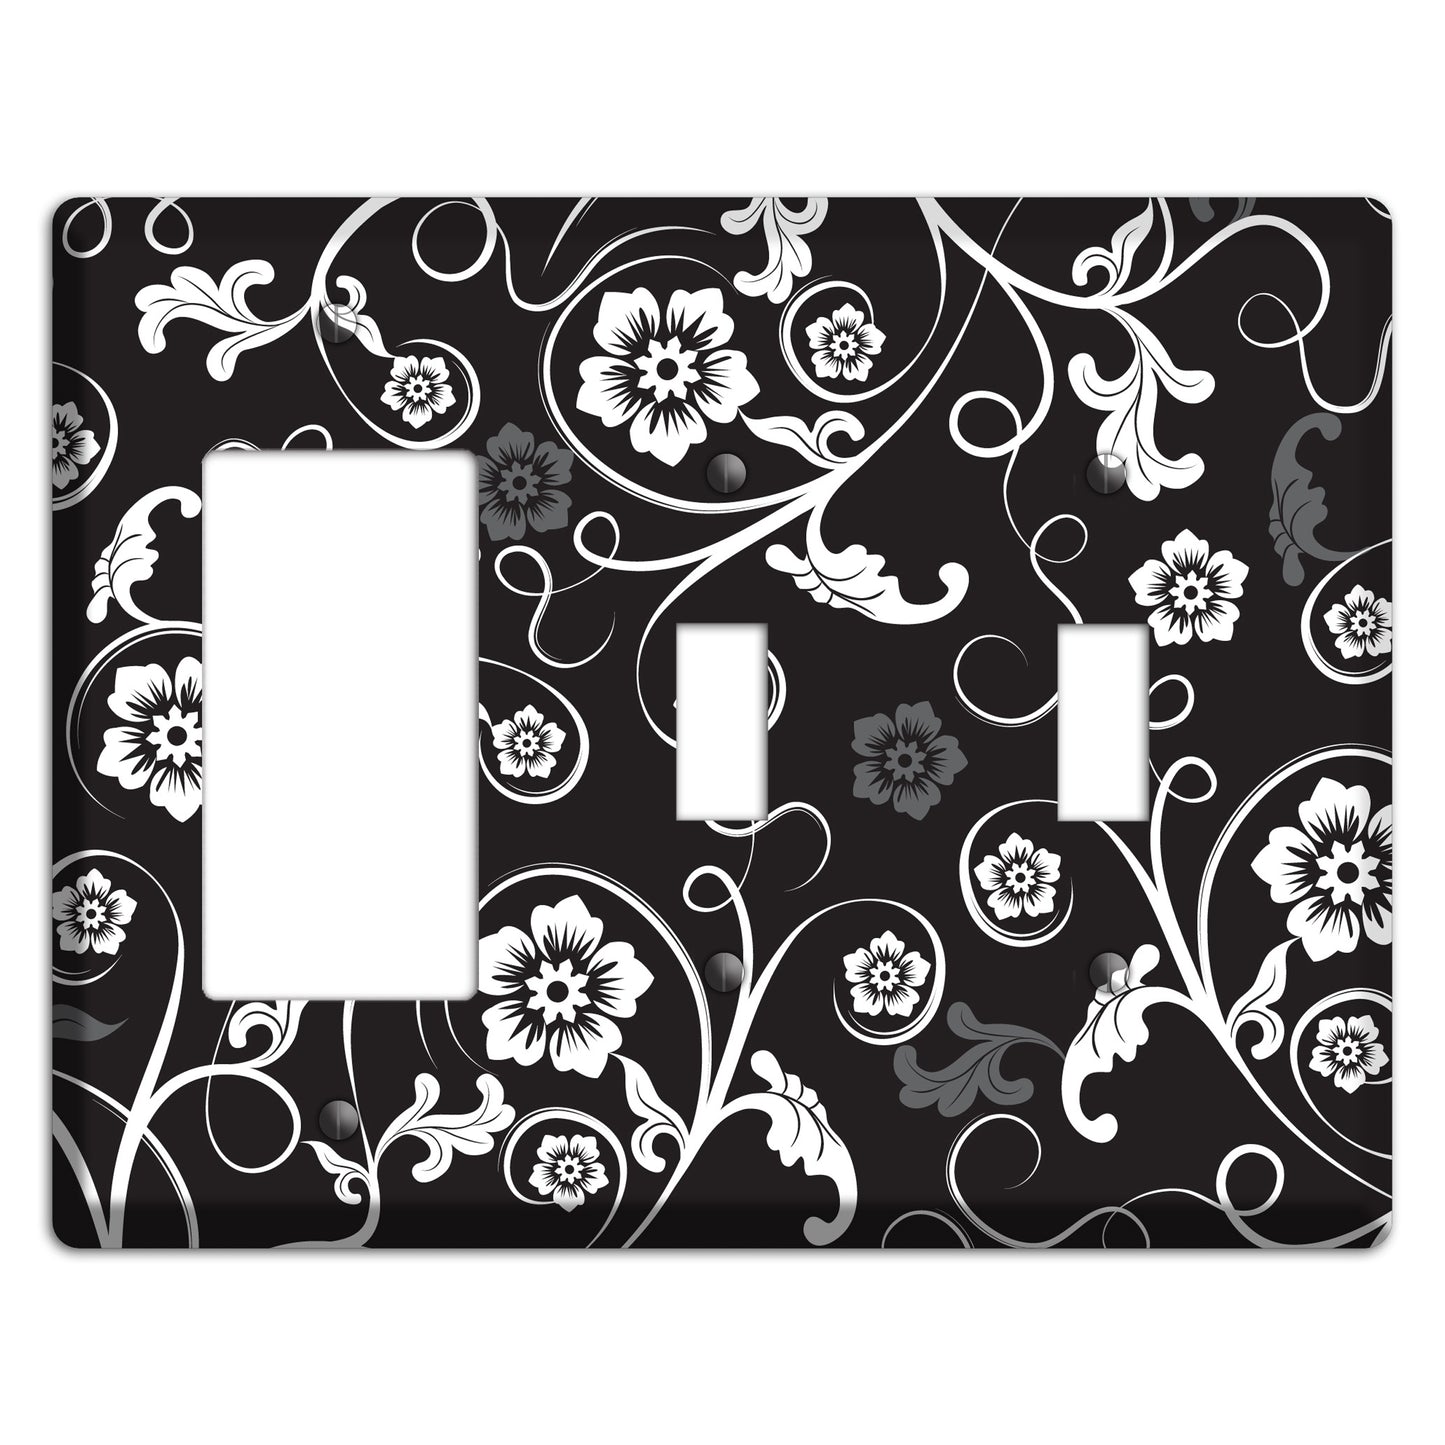 Black with White Flower Sprig Rocker / 2 Toggle Wallplate